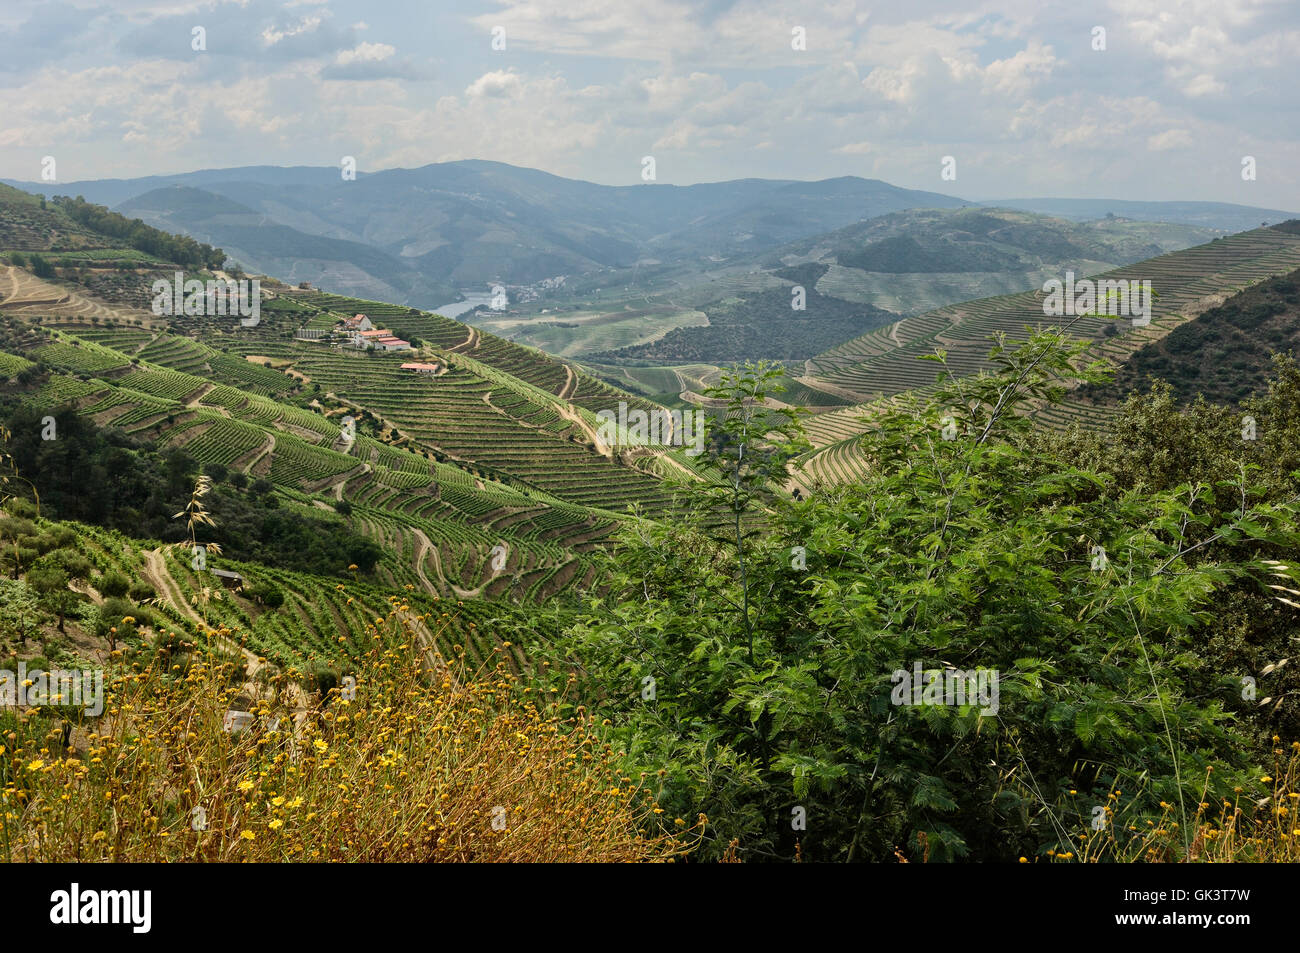 The vineyards of the Douro valley. Portugal. Europe Stock Photo